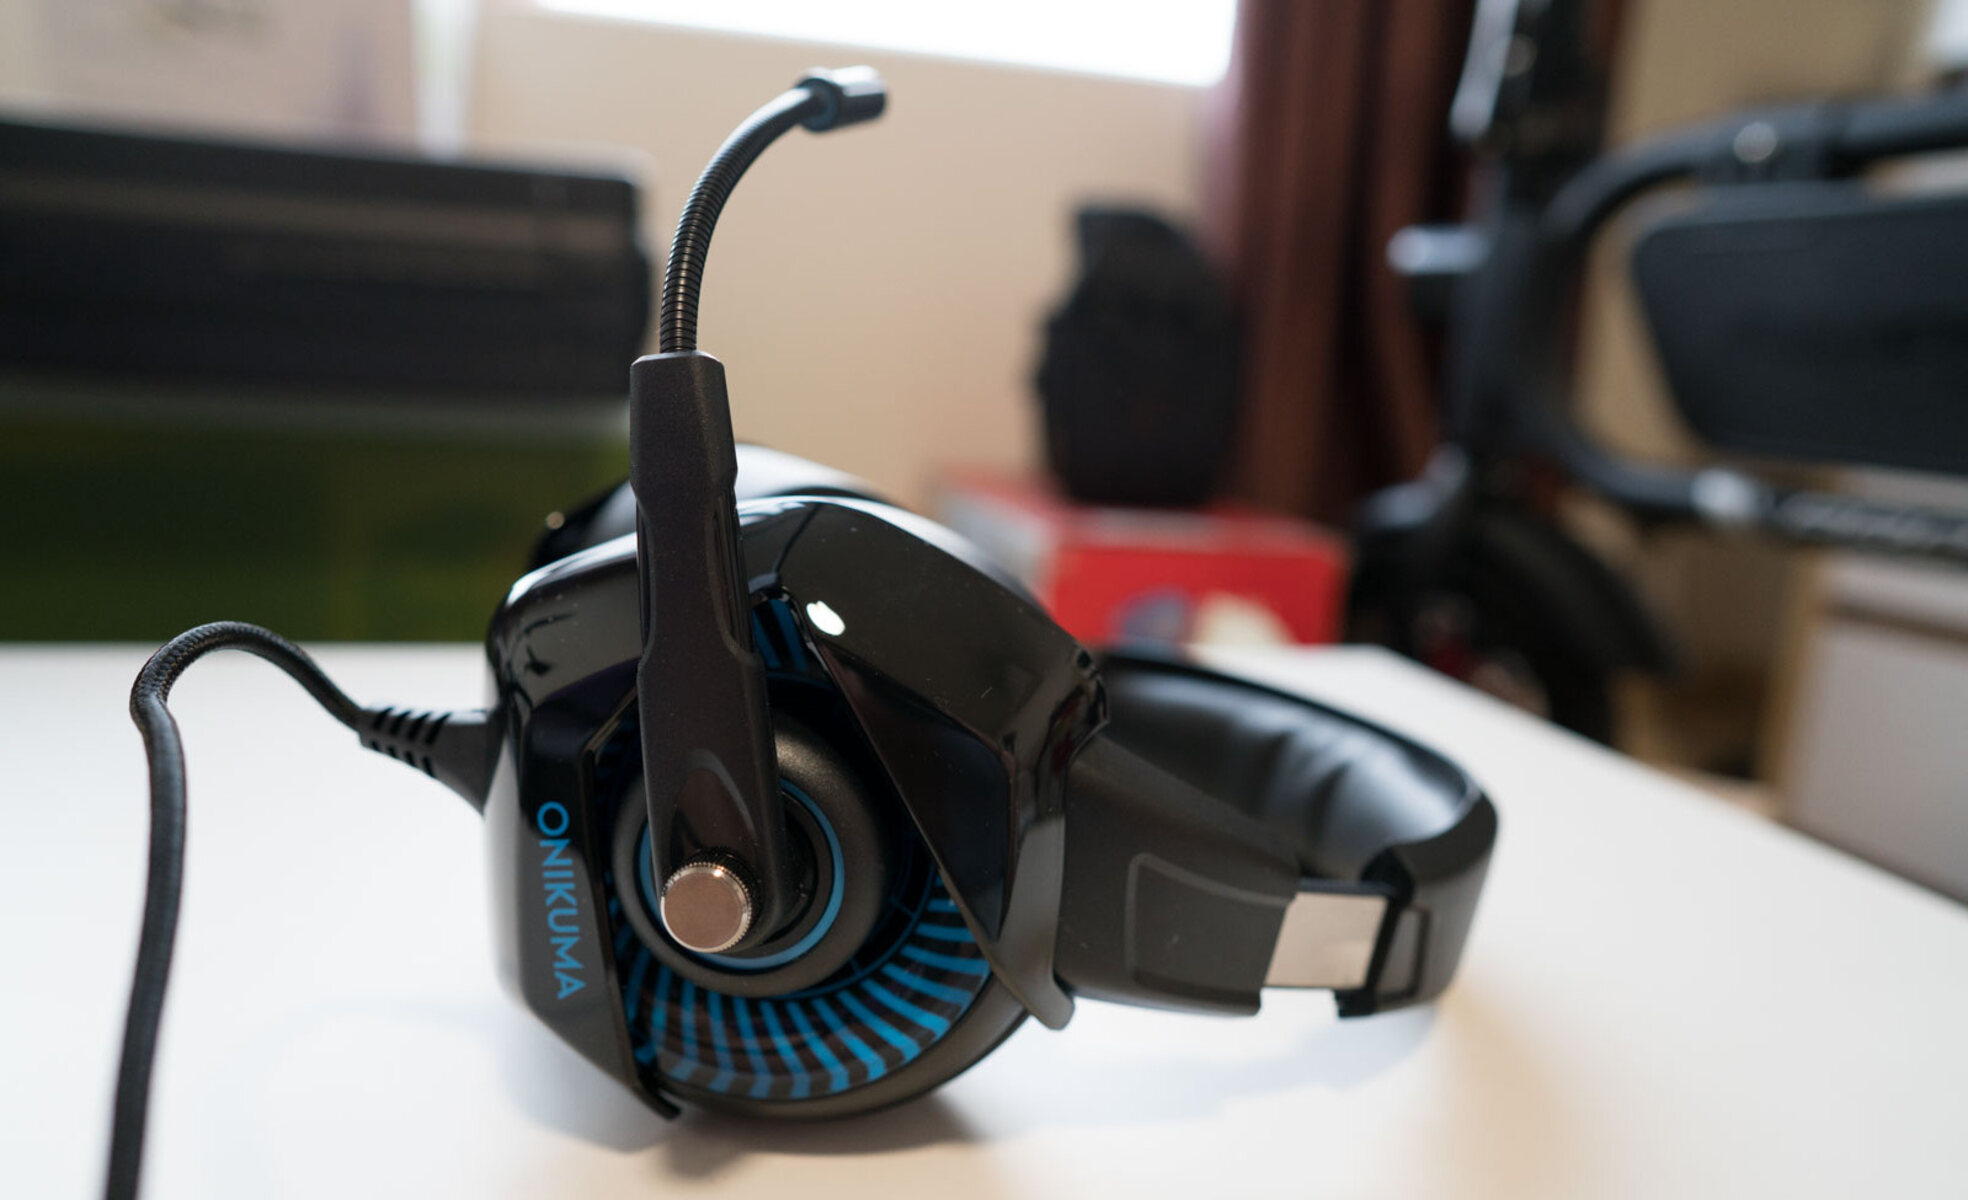 k5-or-k6-which-gaming-headset-is-better